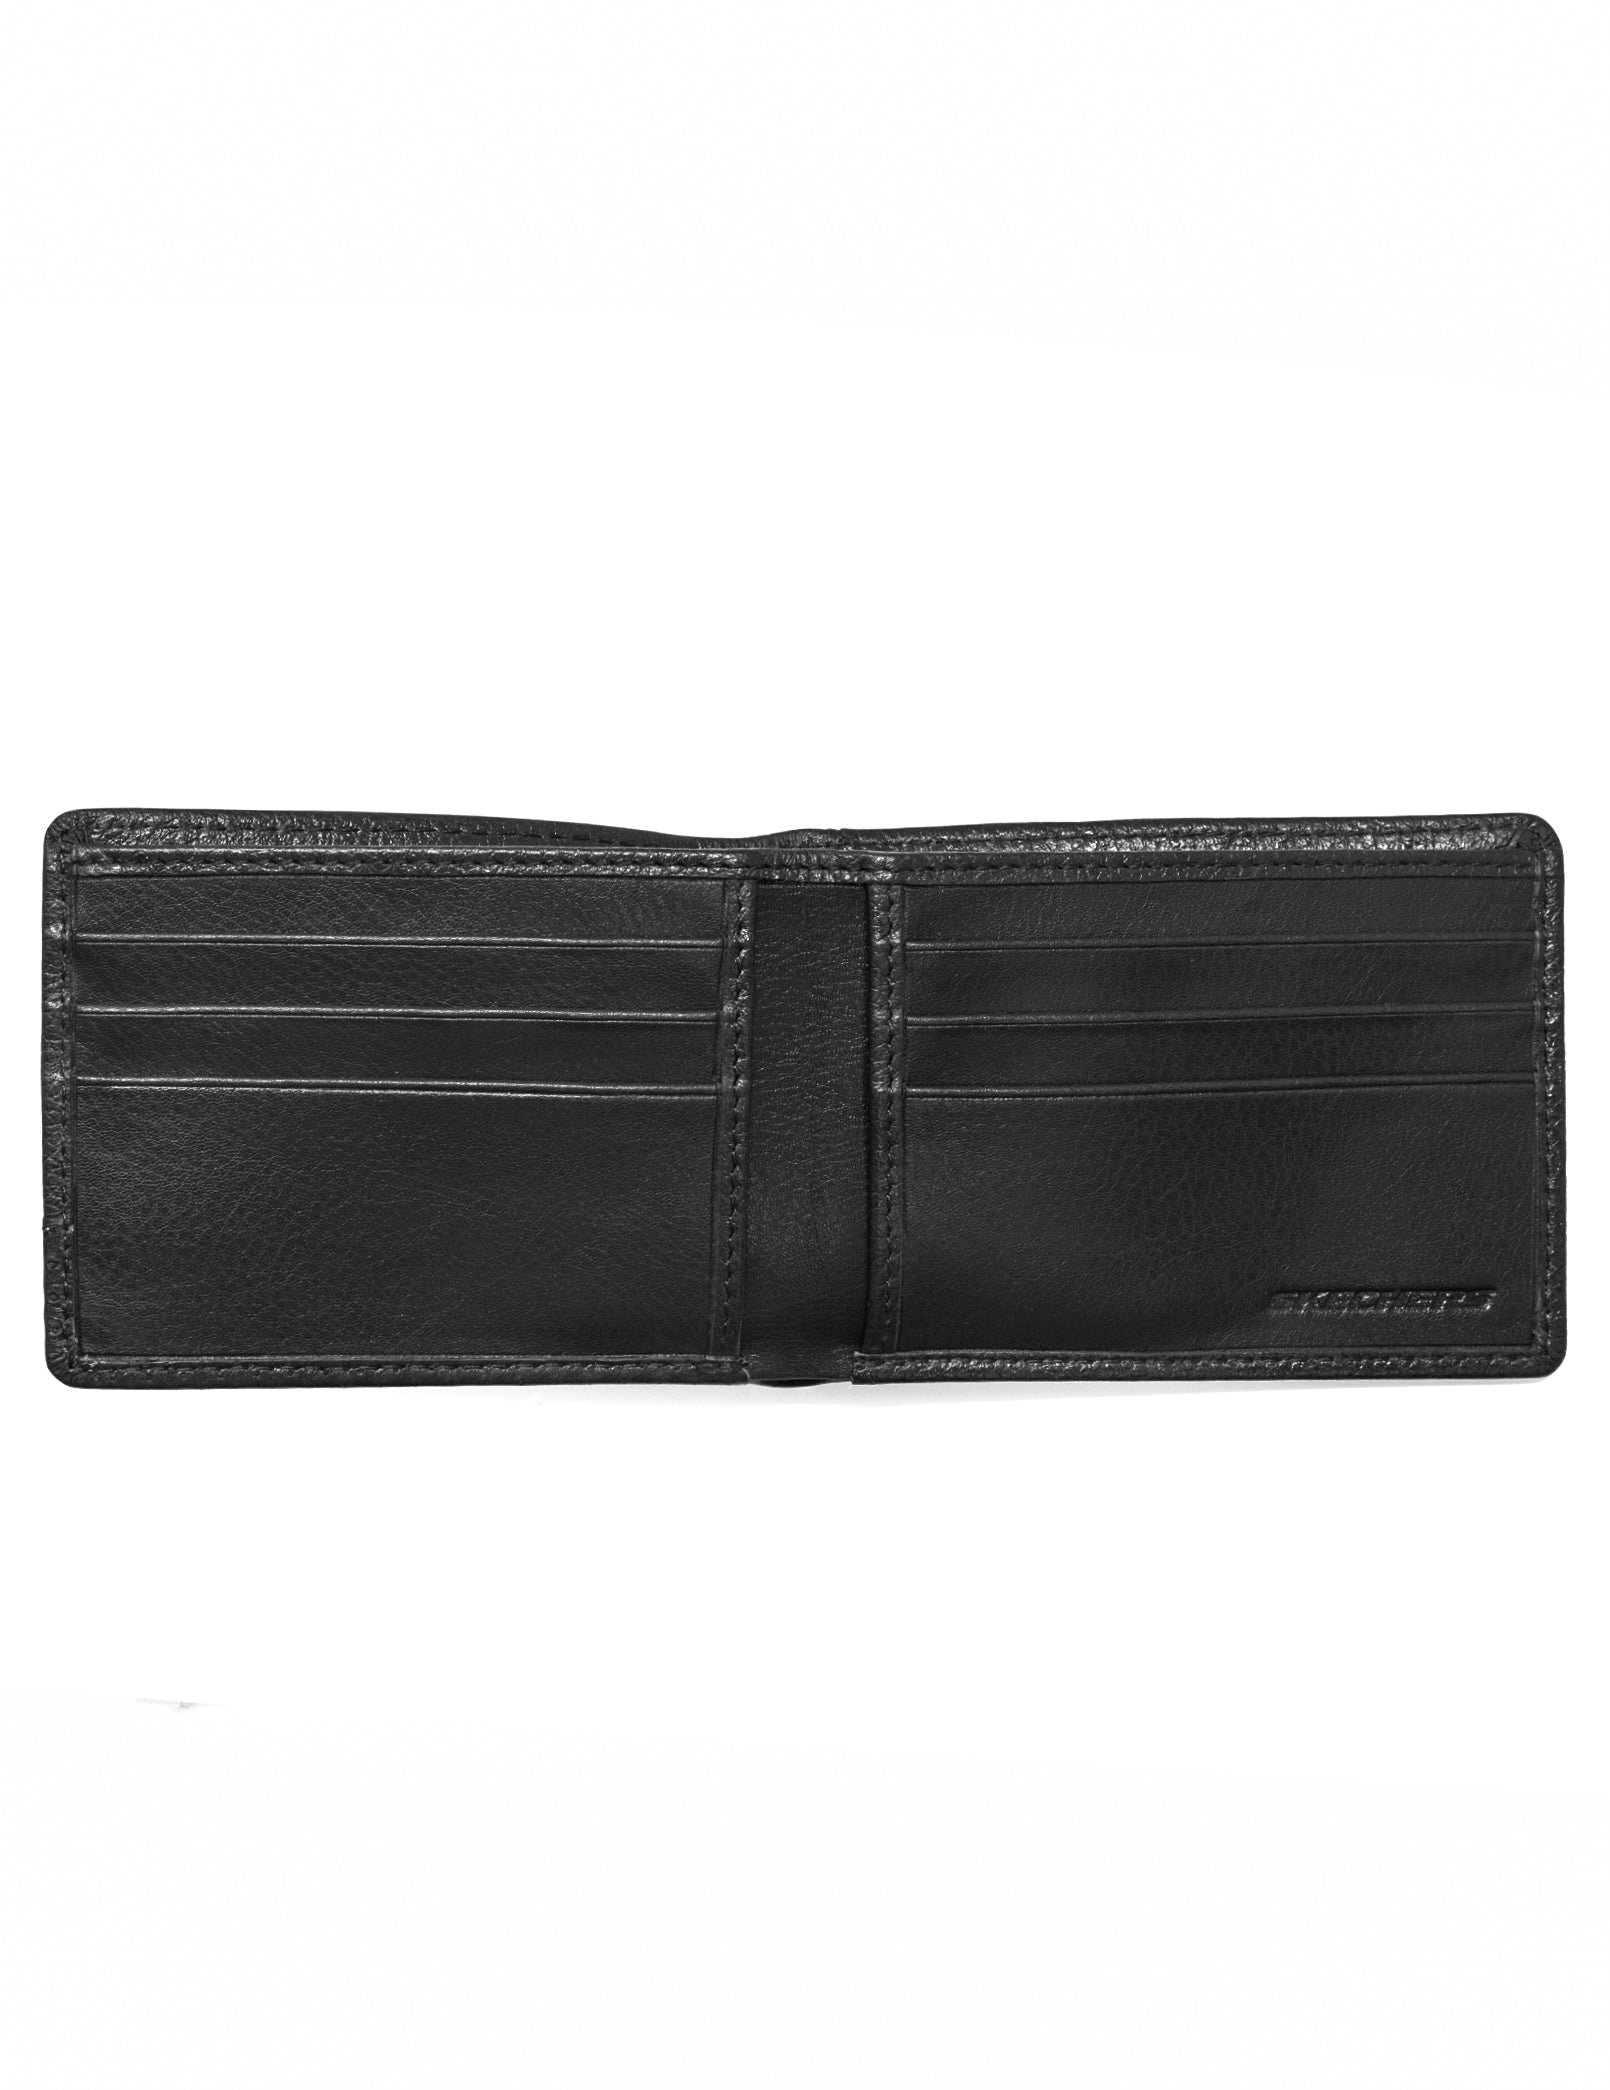 Black slim wallet 6 card slots, 2 slip pockets and one cash compartment